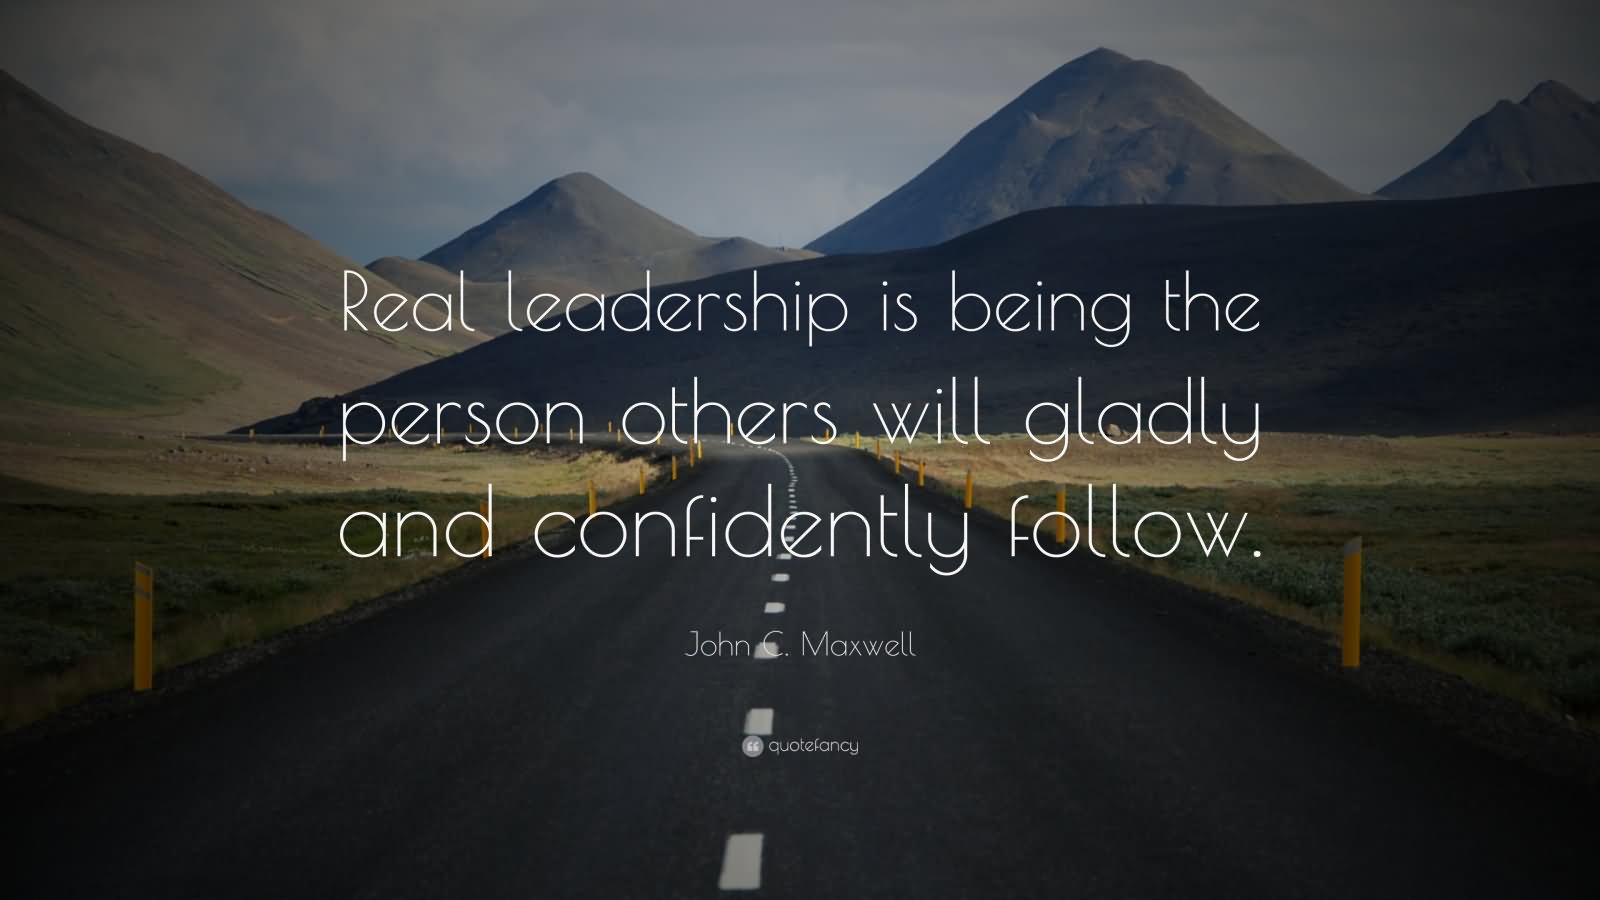 Real leadership is being the person others will gladly and confidently follow.